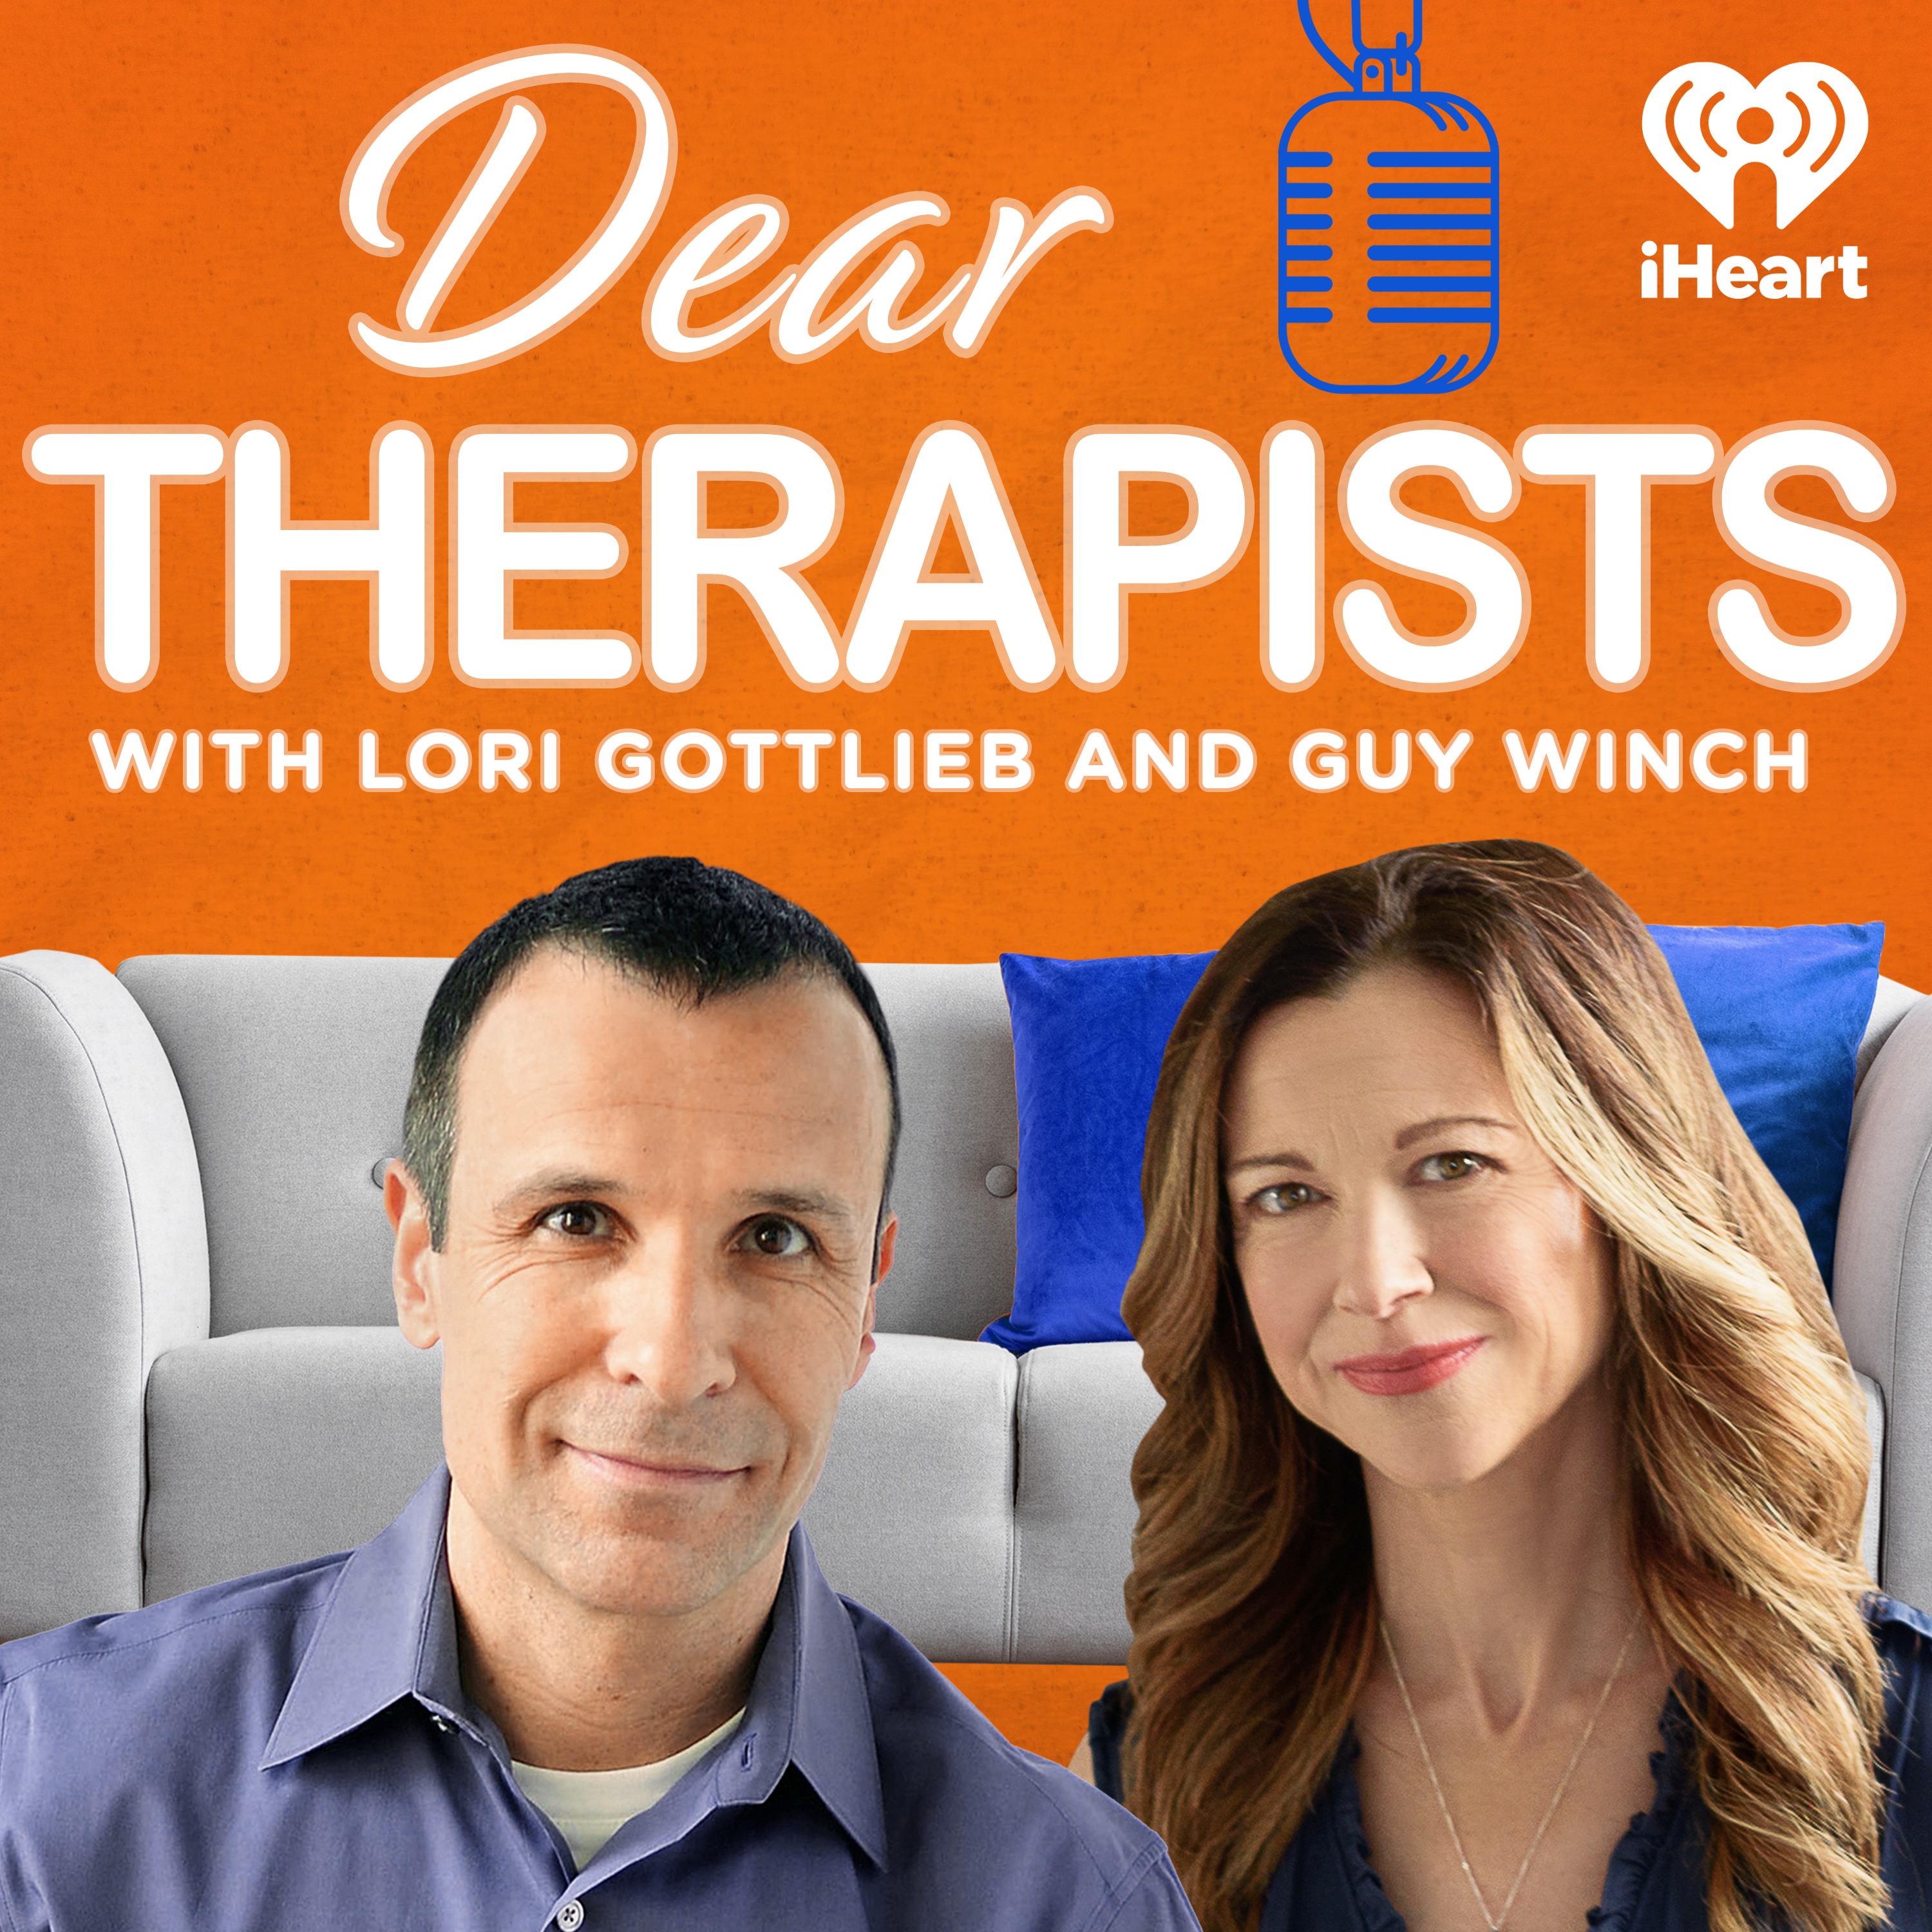 Introducing: Dear Therapists